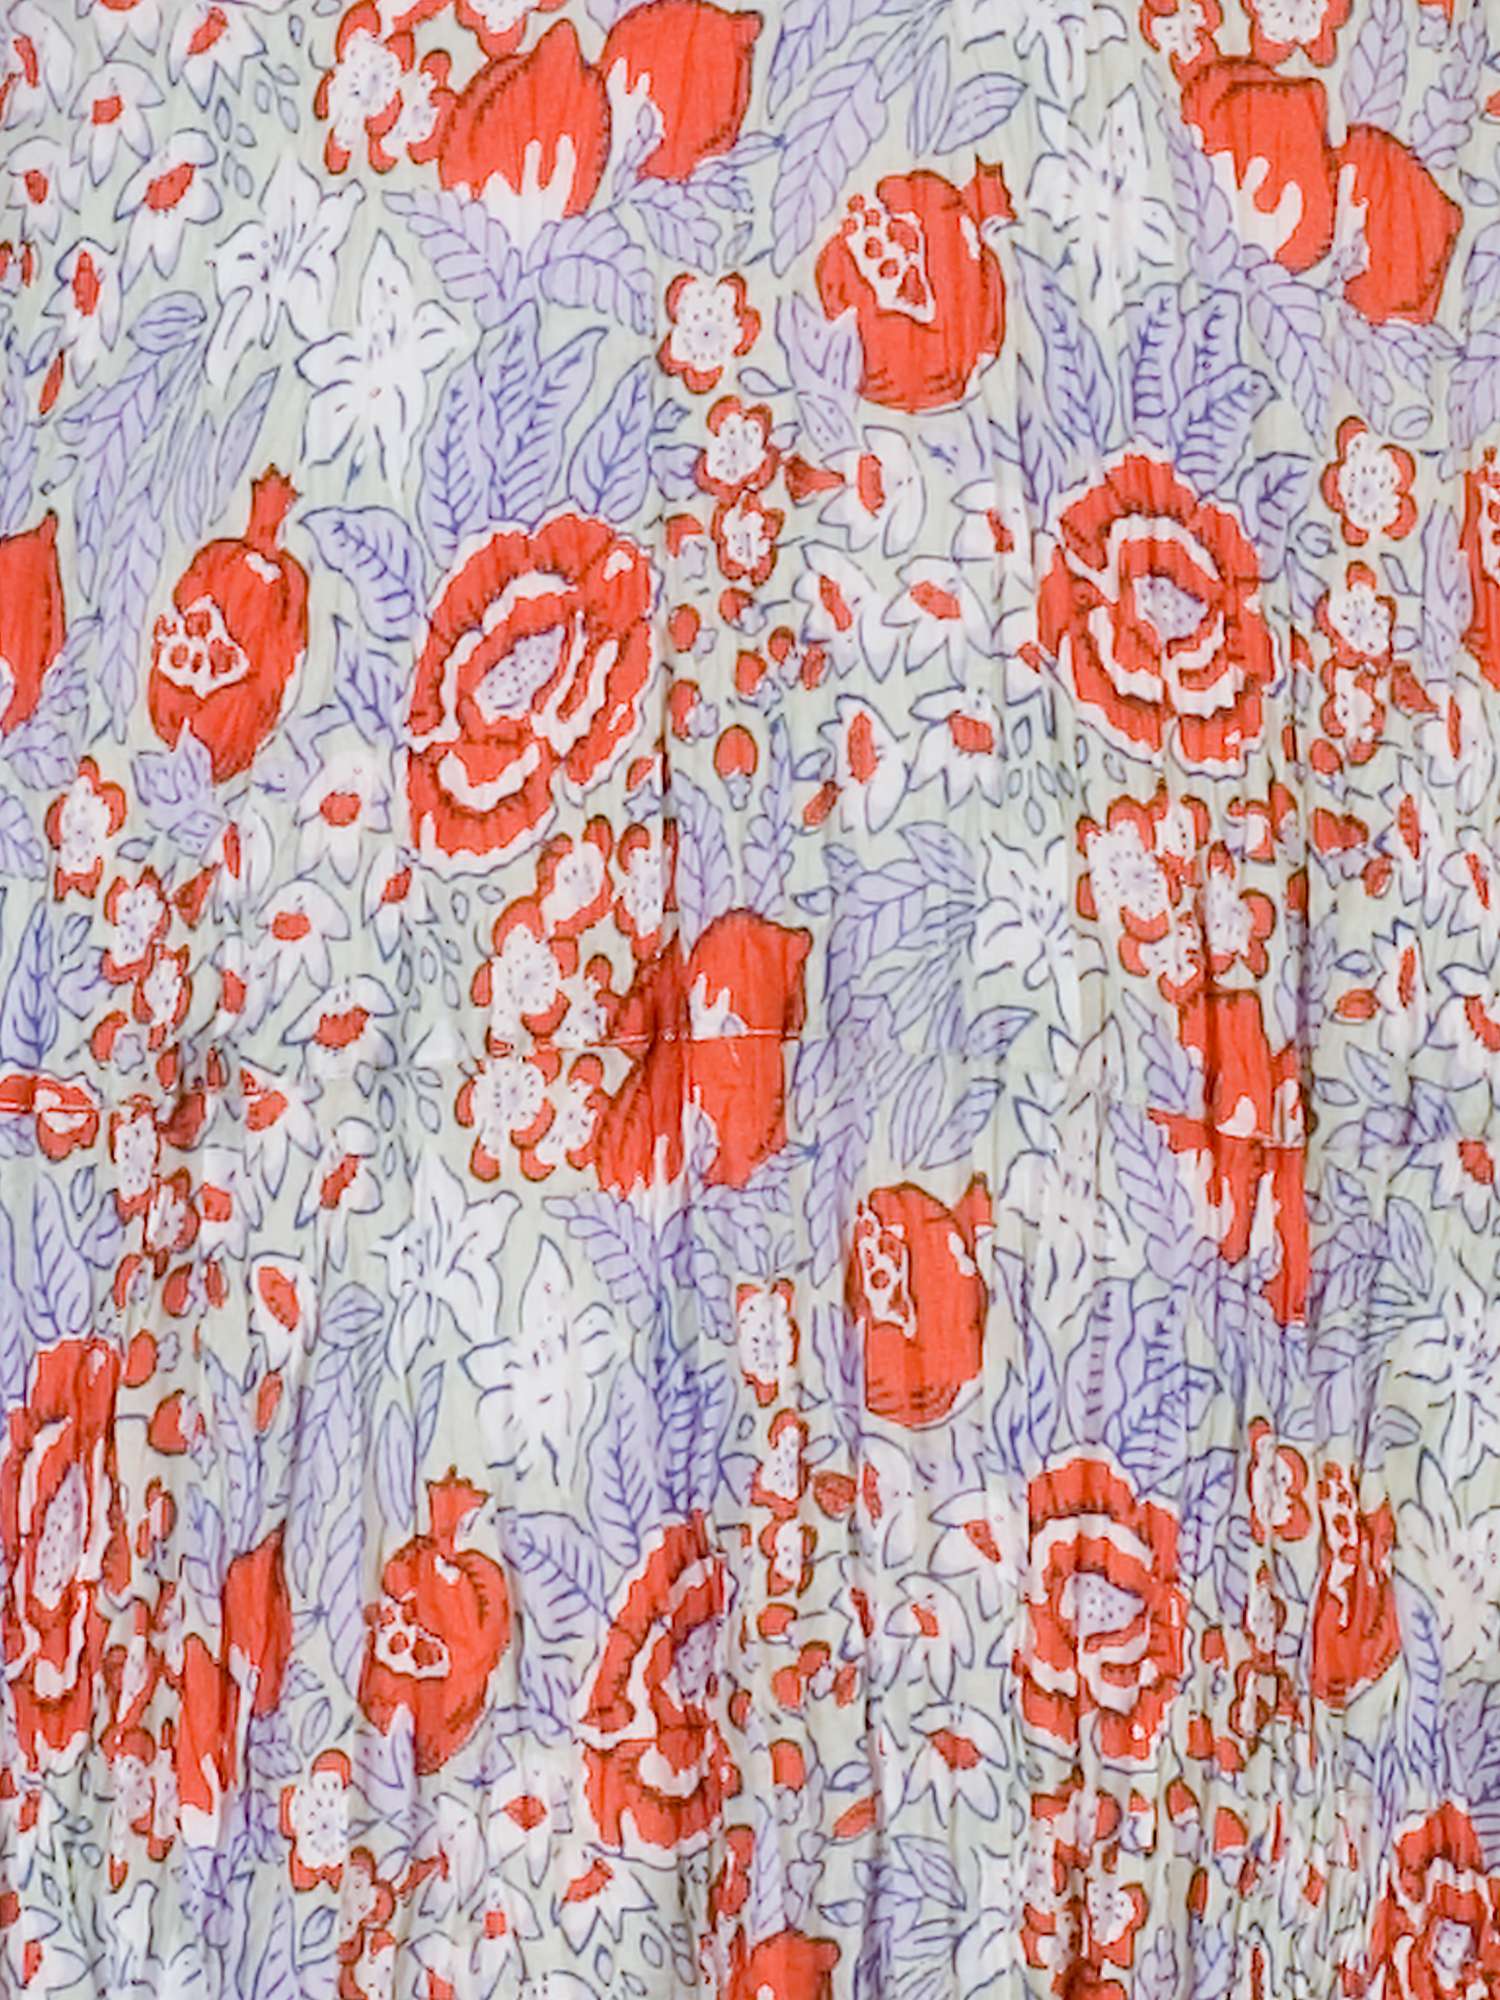 Buy chesca Trim Tiered Floral Print Crushed Cotton Dress, Coral Online at johnlewis.com